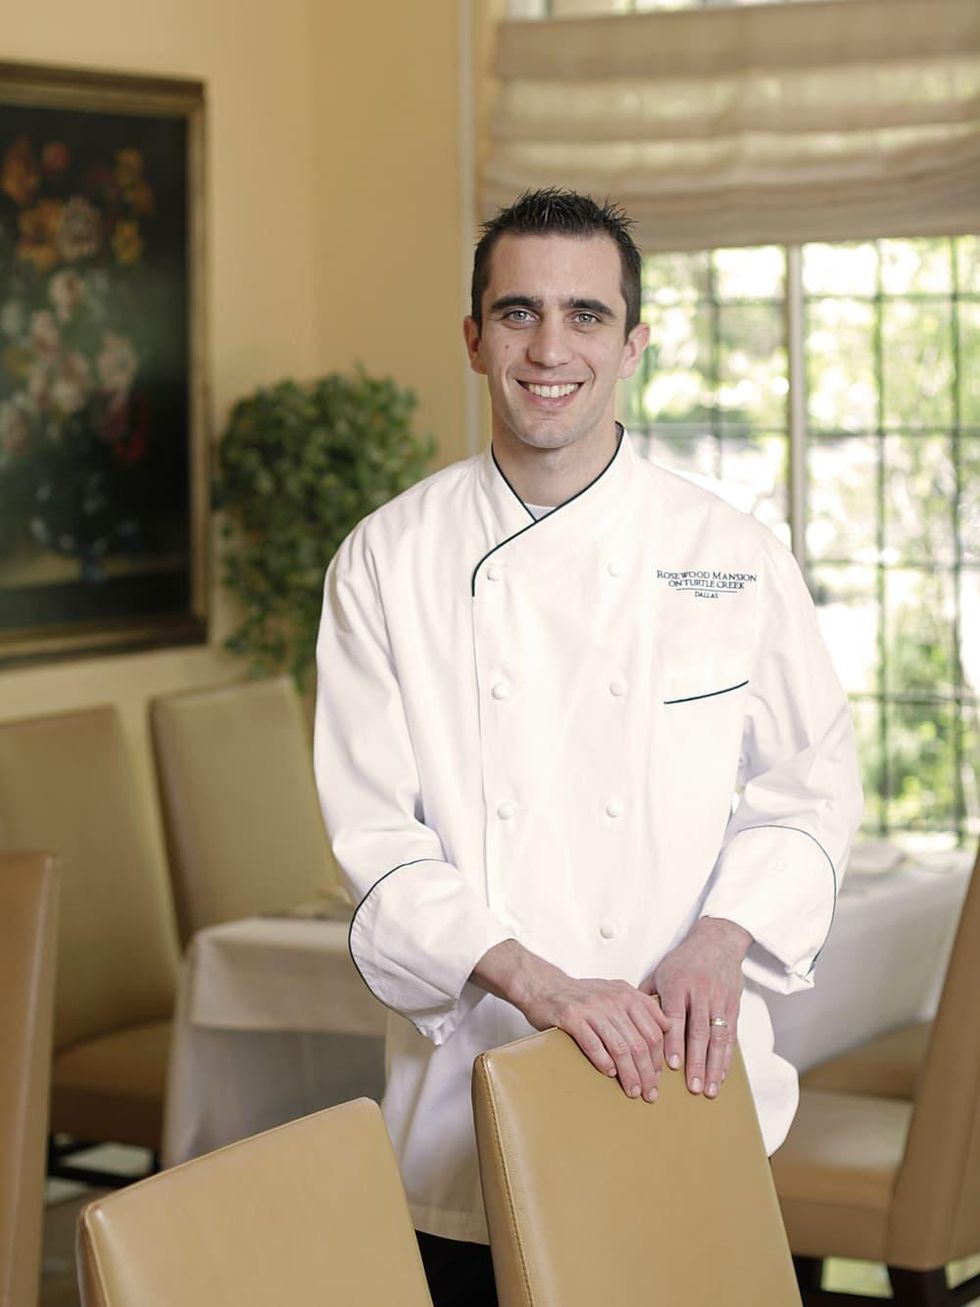 Pastry chef Nicolas Blouin of Rosewood Mansion on Turtle Creek